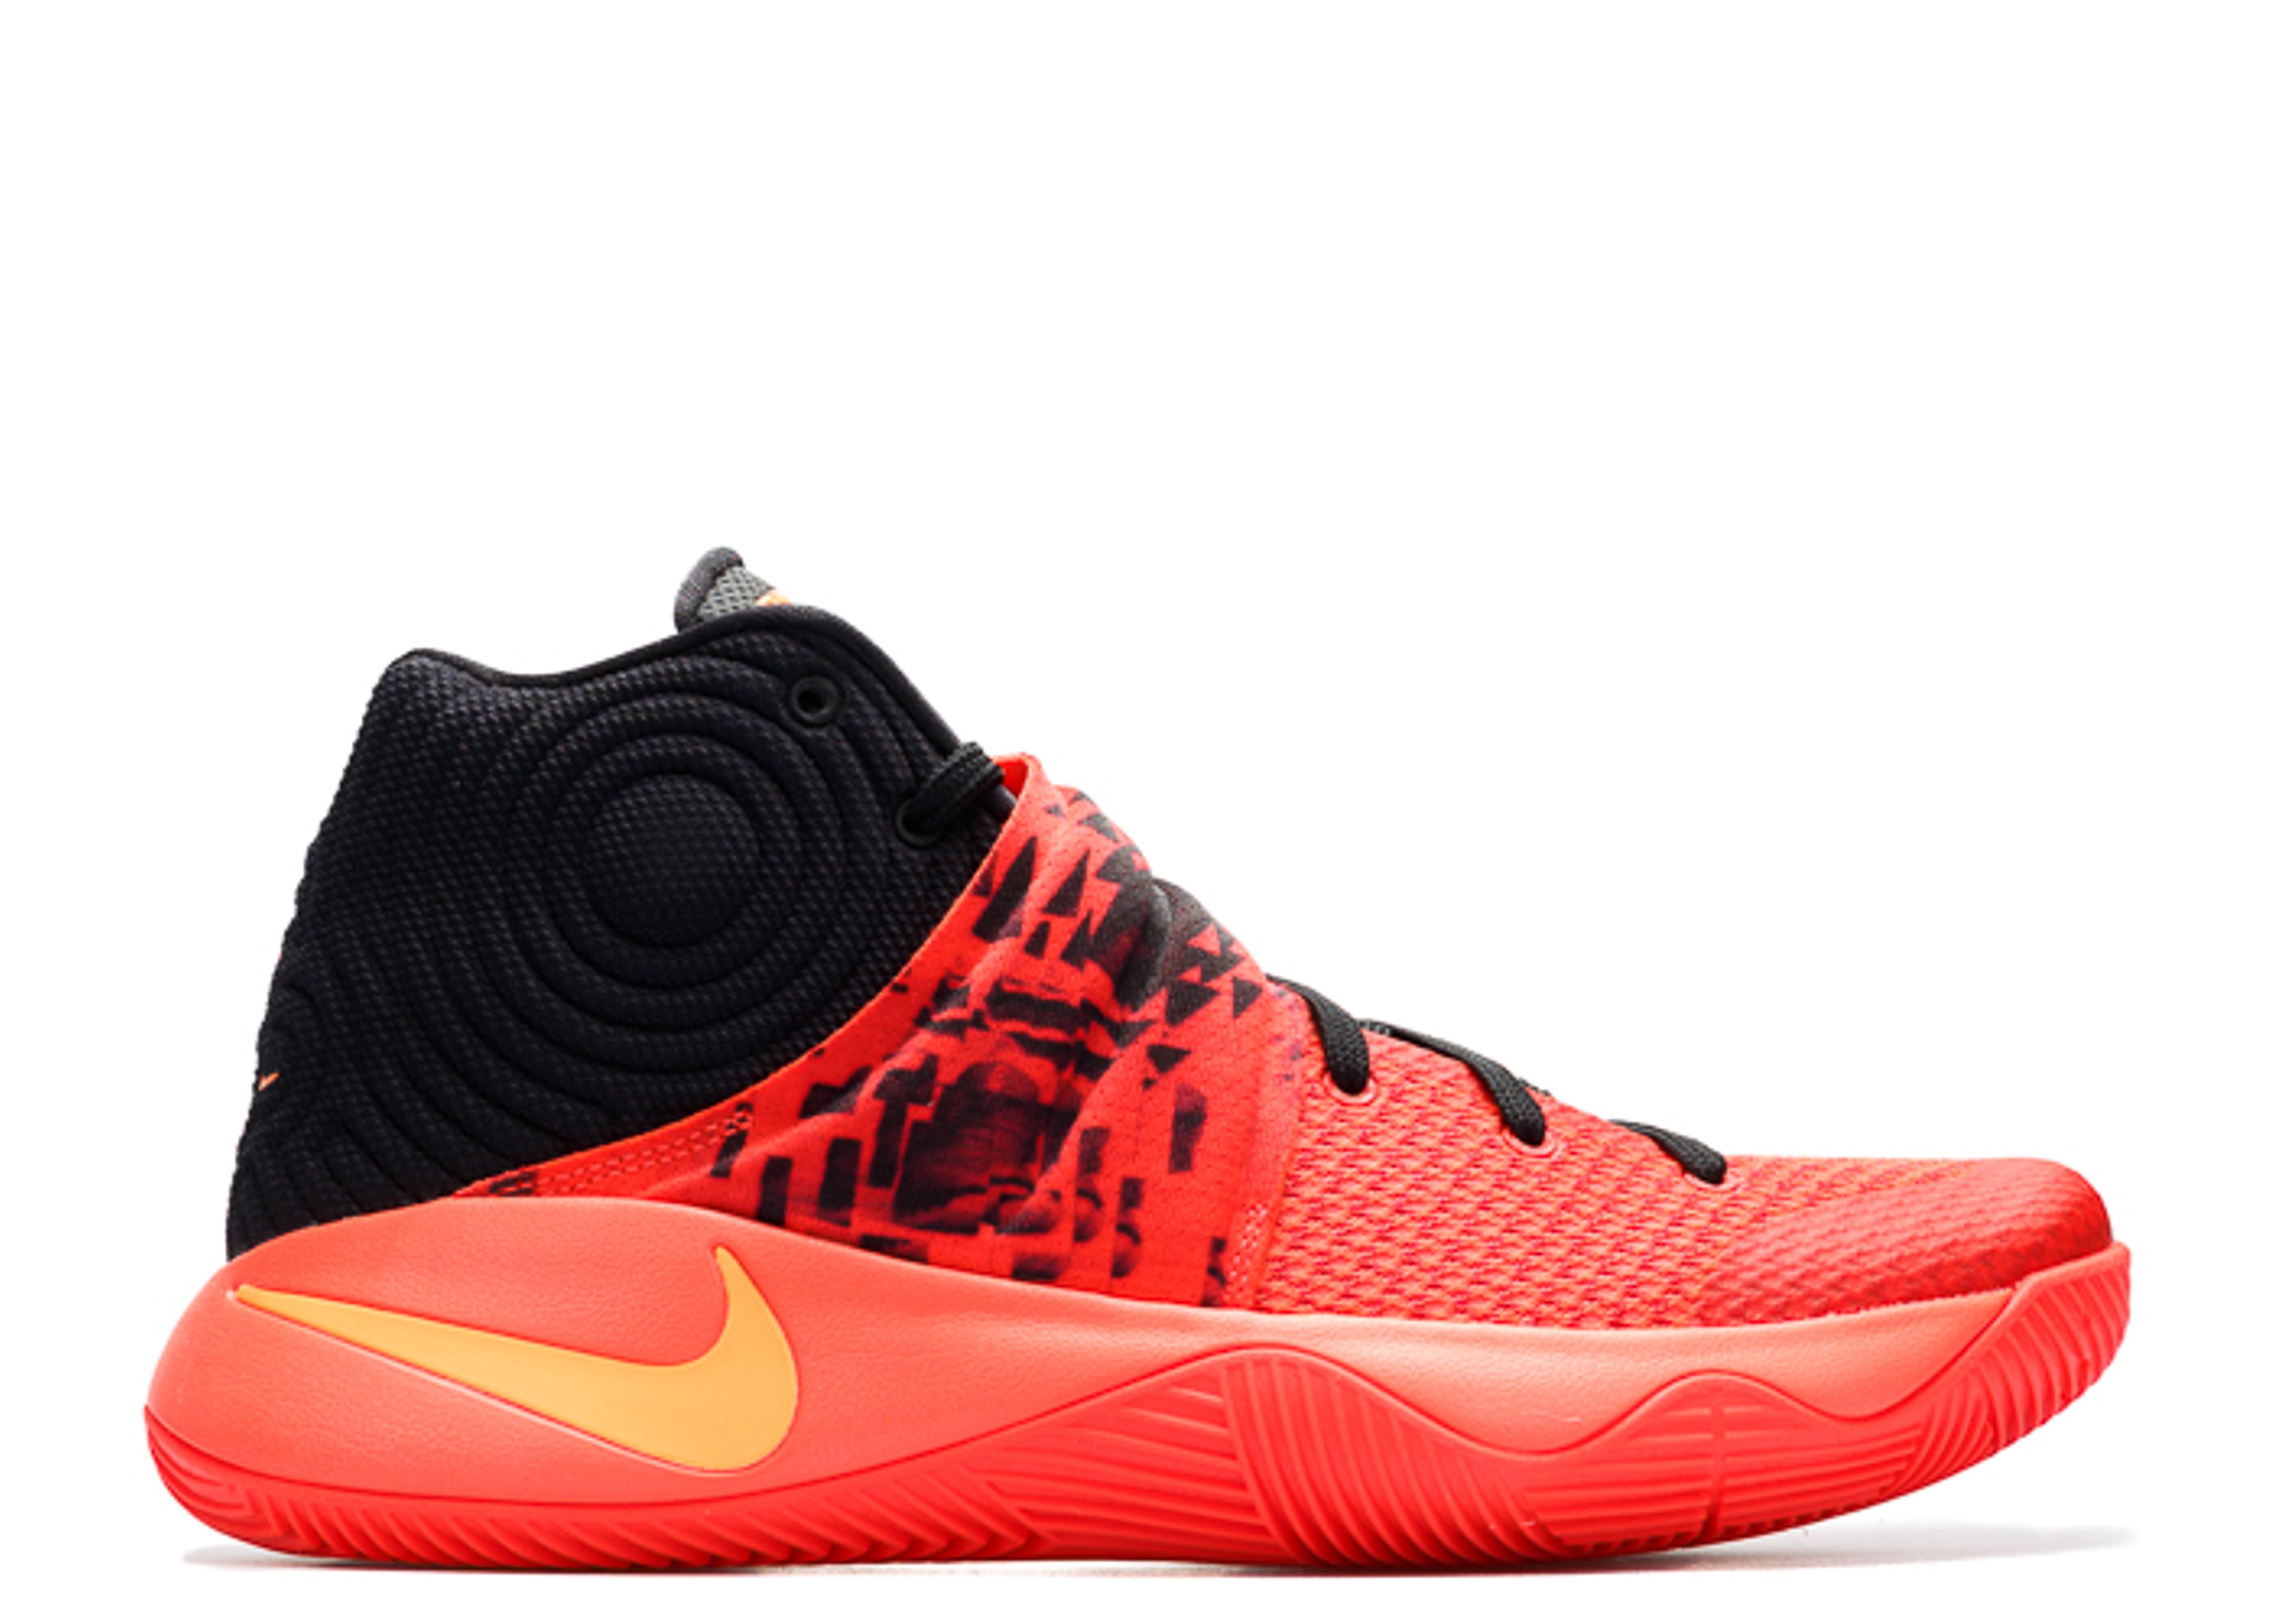 kyrie irving inferno 2